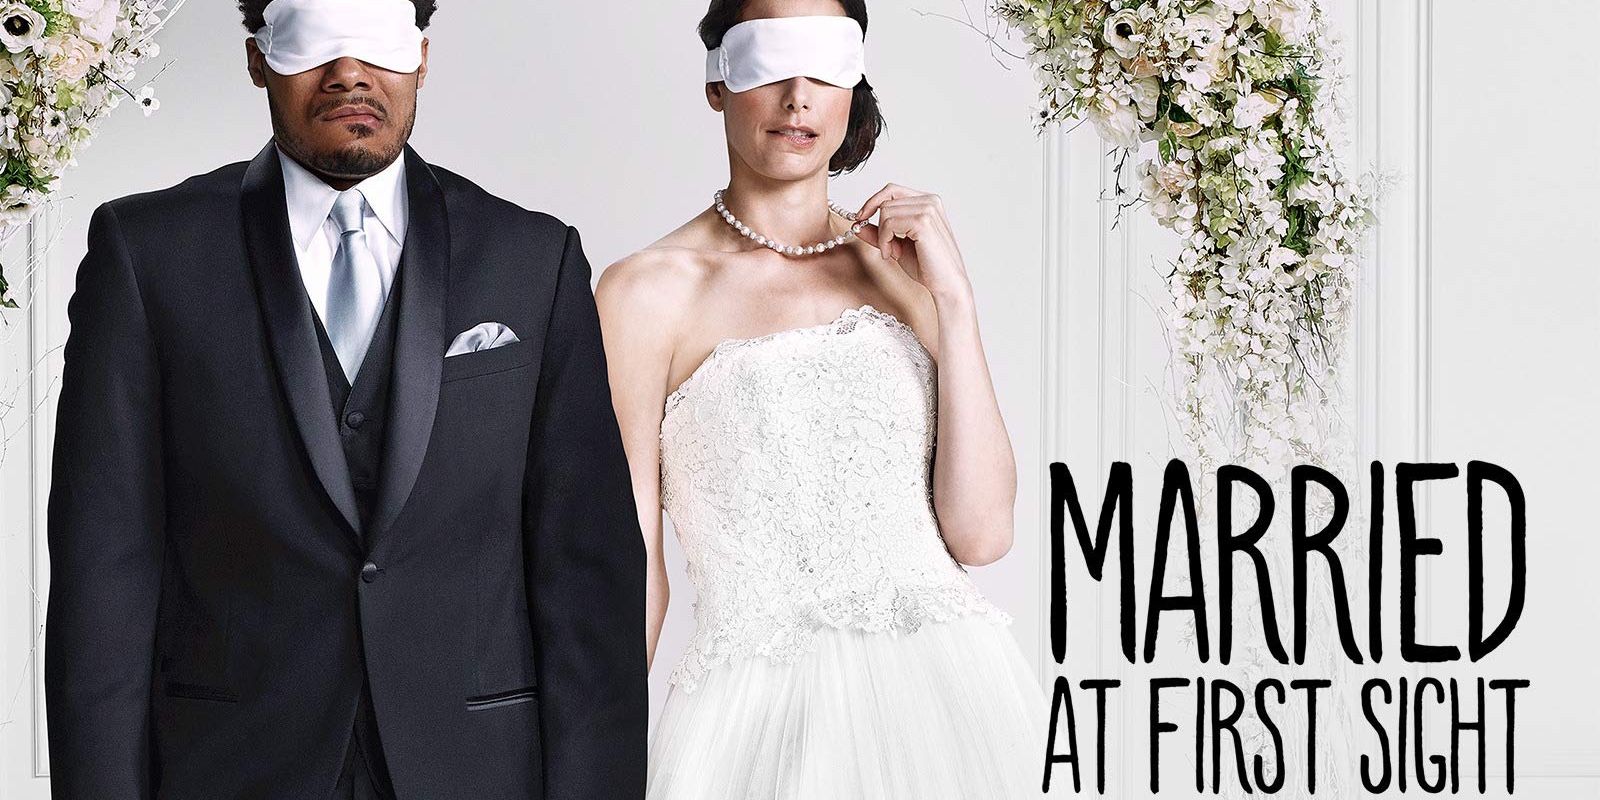 Married At First Sight: Season 13 to Premiere July 21 on Lifetime